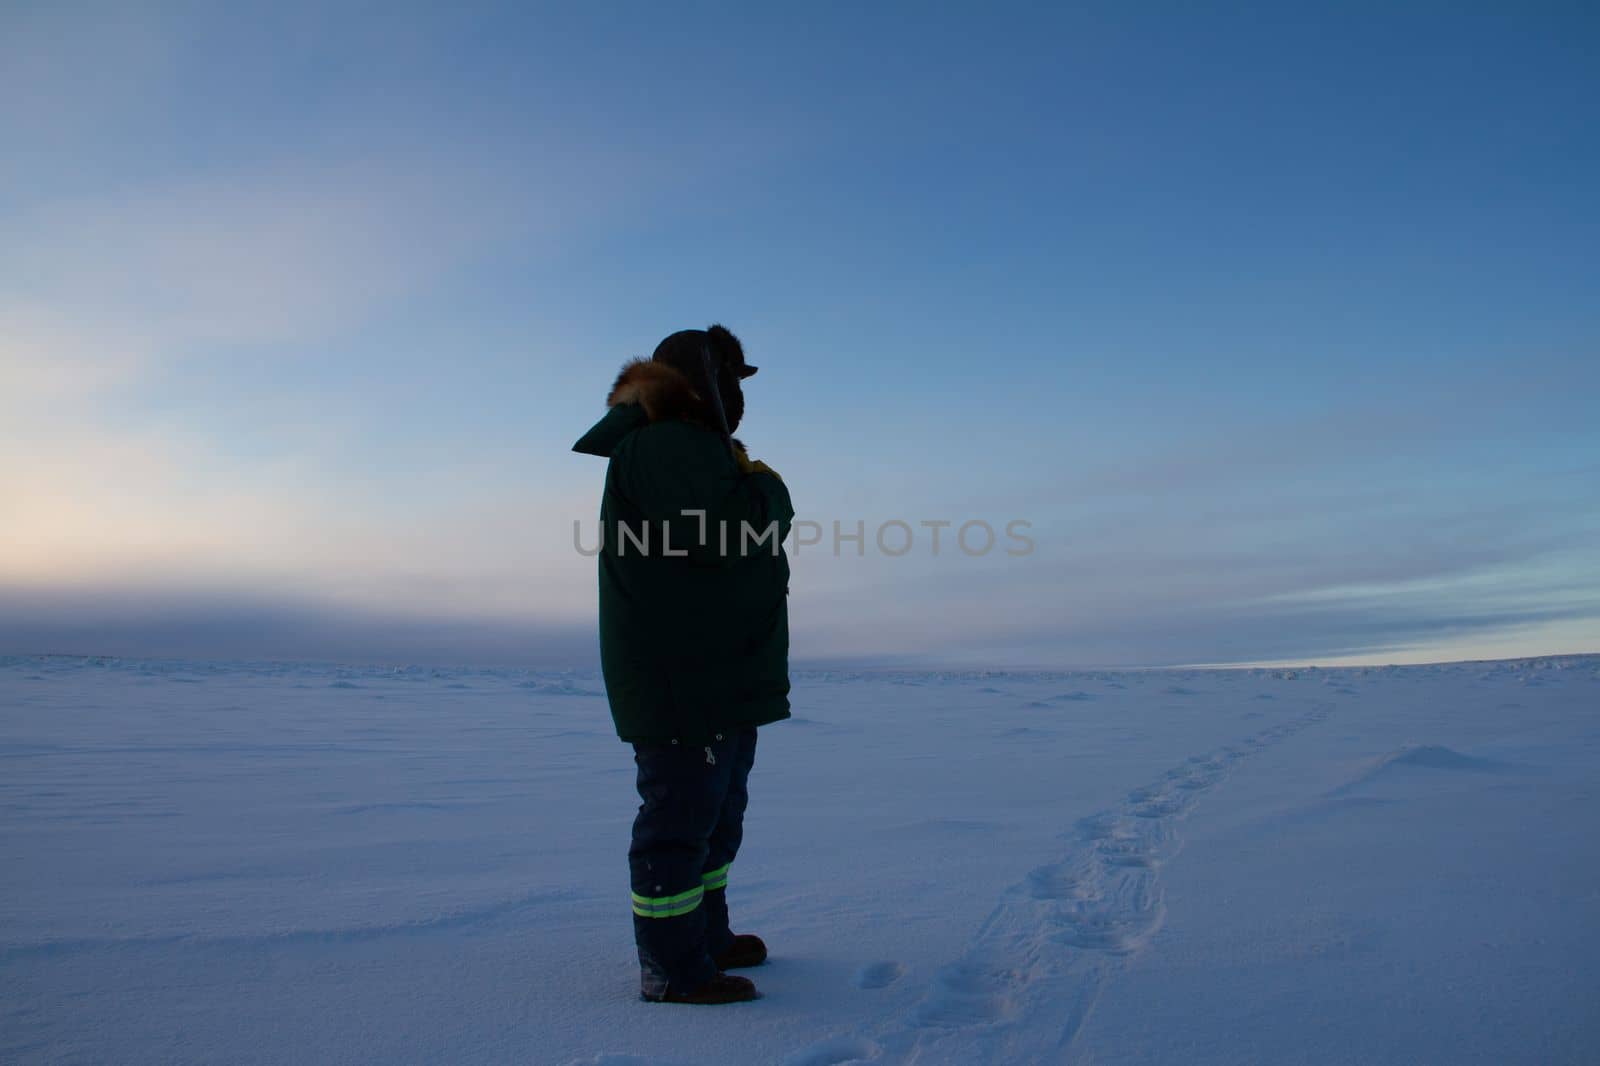 Man in winter clothing standing on snow watching the weather on tundra landscape while holding a rifle, near Arviat, Nunavut, Canada